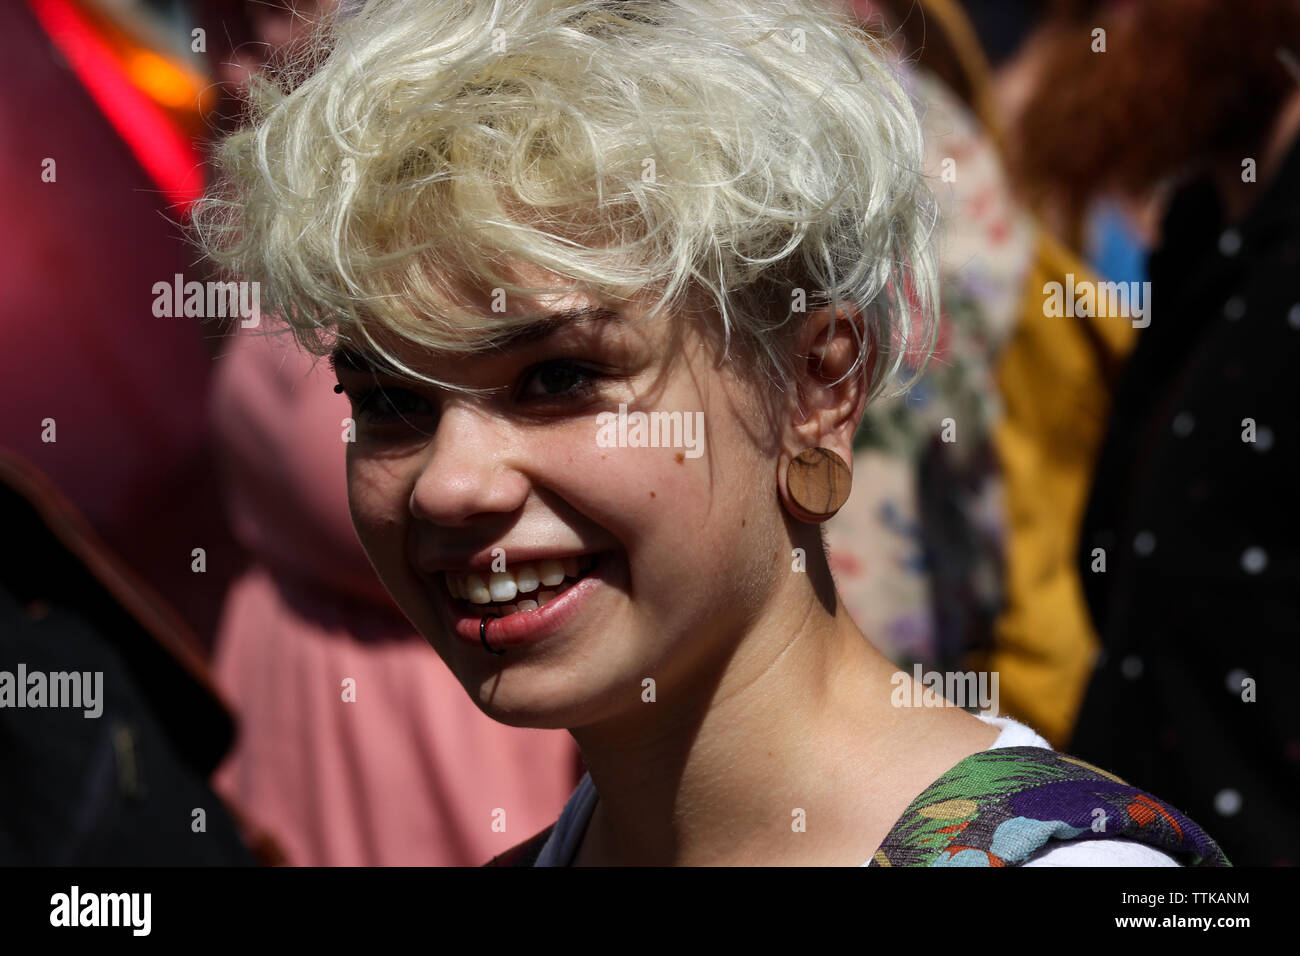 Young woman or teenage girl at Helsinki Pride Parade 2016 in Helsinki, Finland Stock Photo